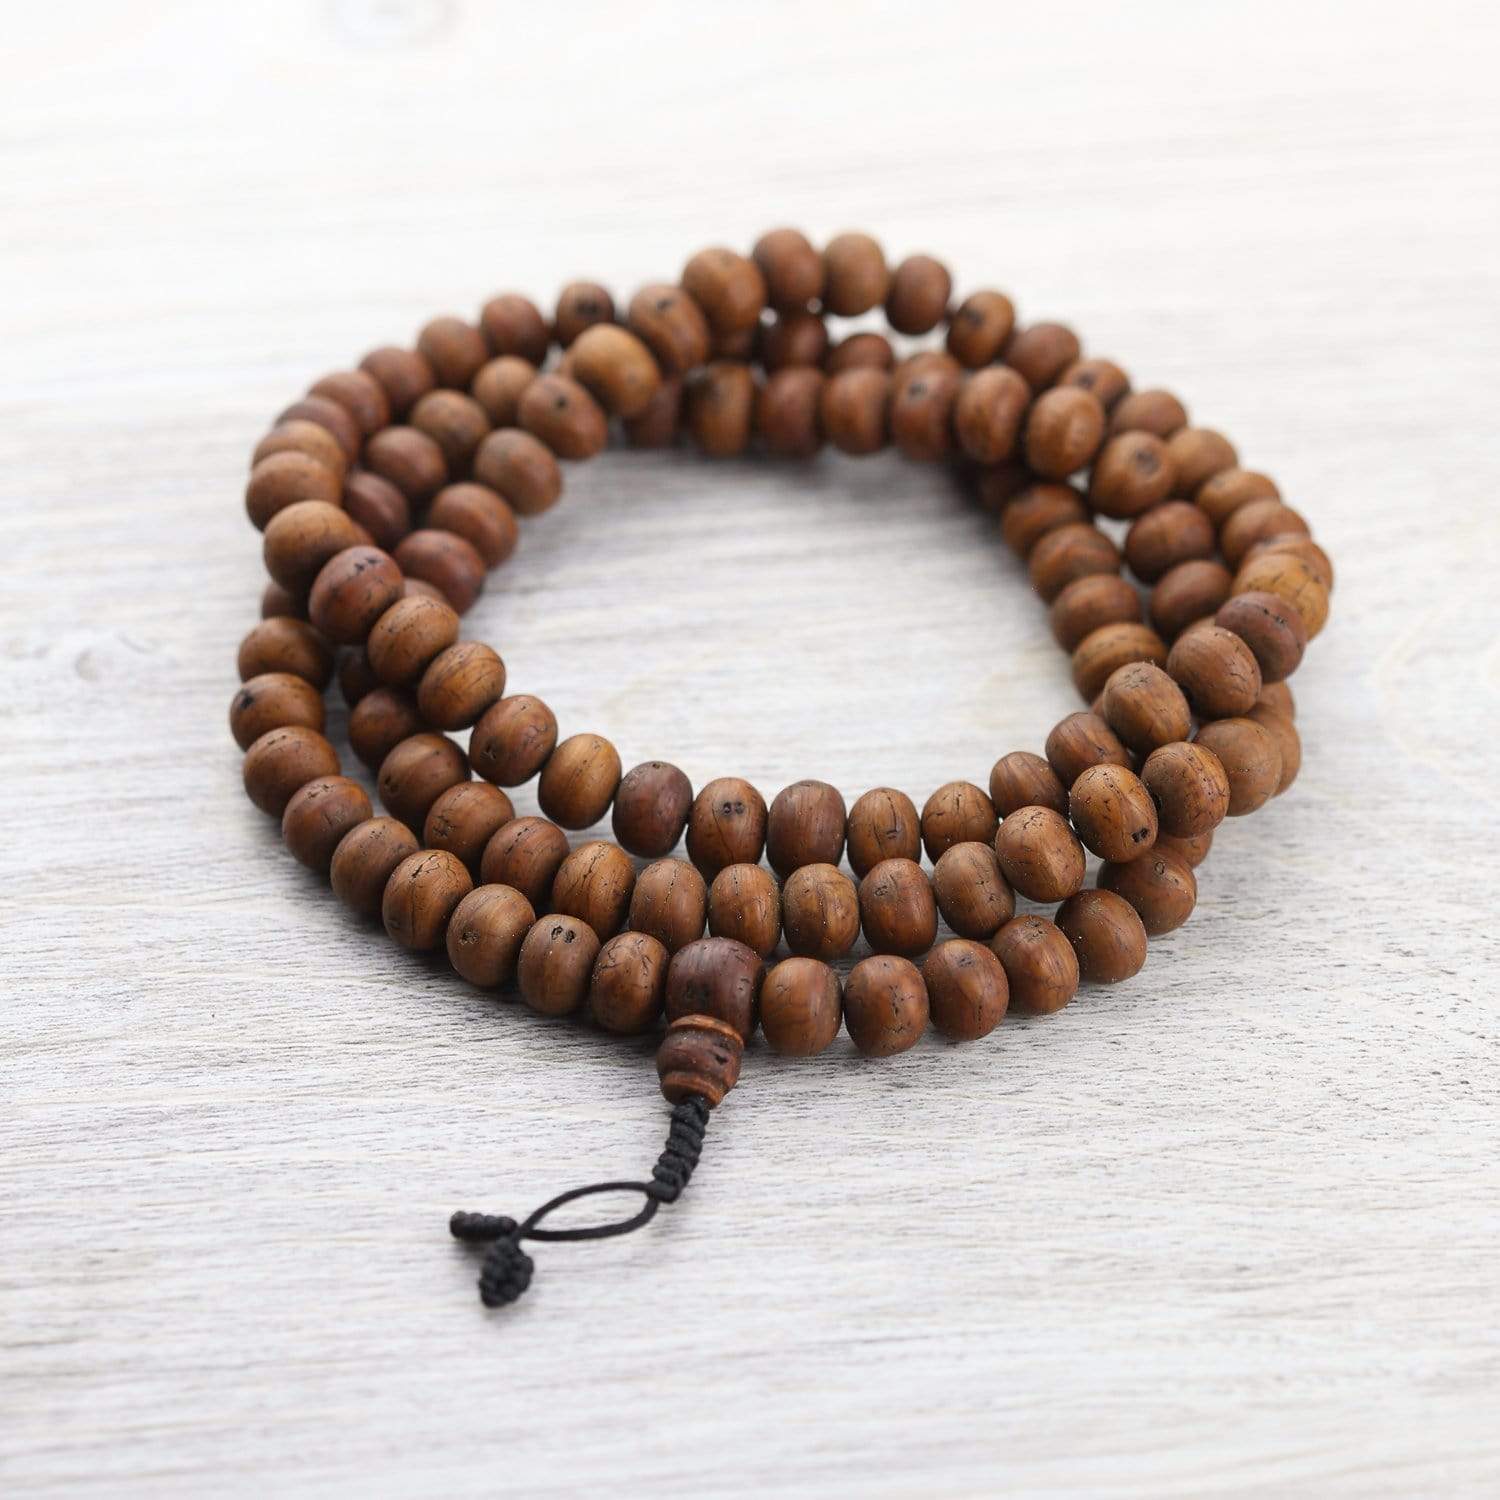 Dark Bodhi Seed Mala - Handmade and Sustainably Sourced in Nepal